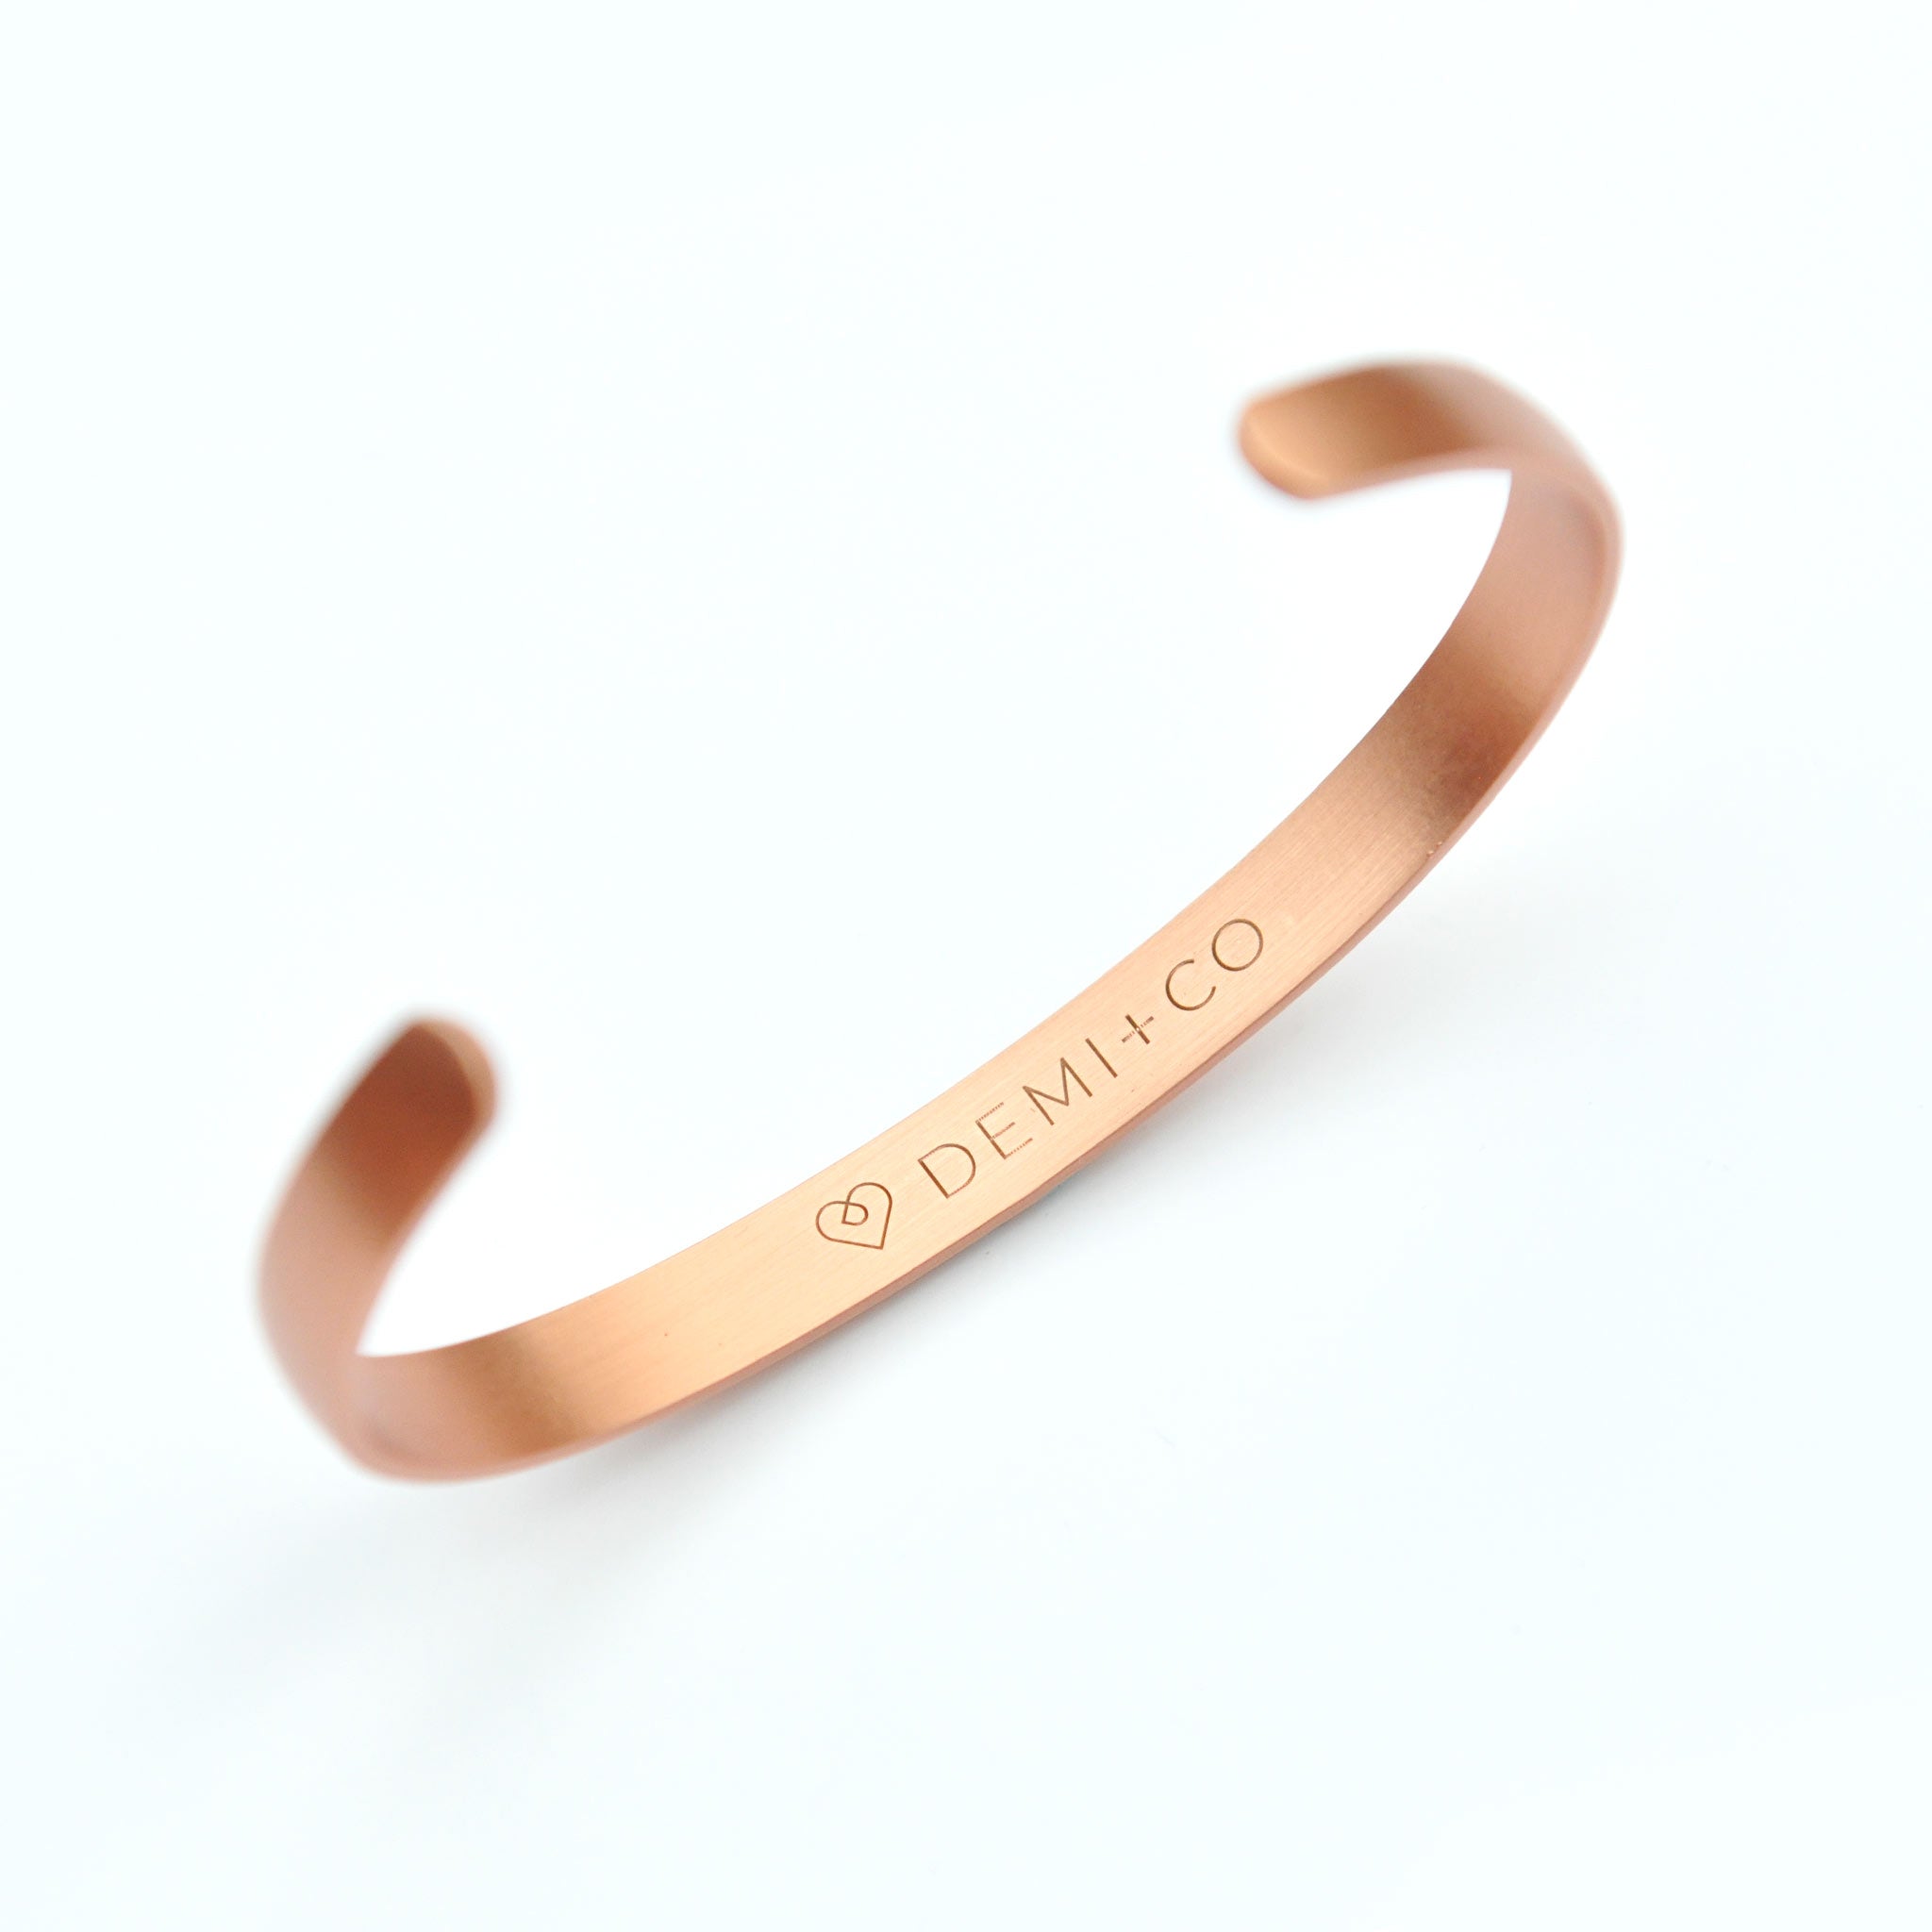 Muse copper bracelet with magnets